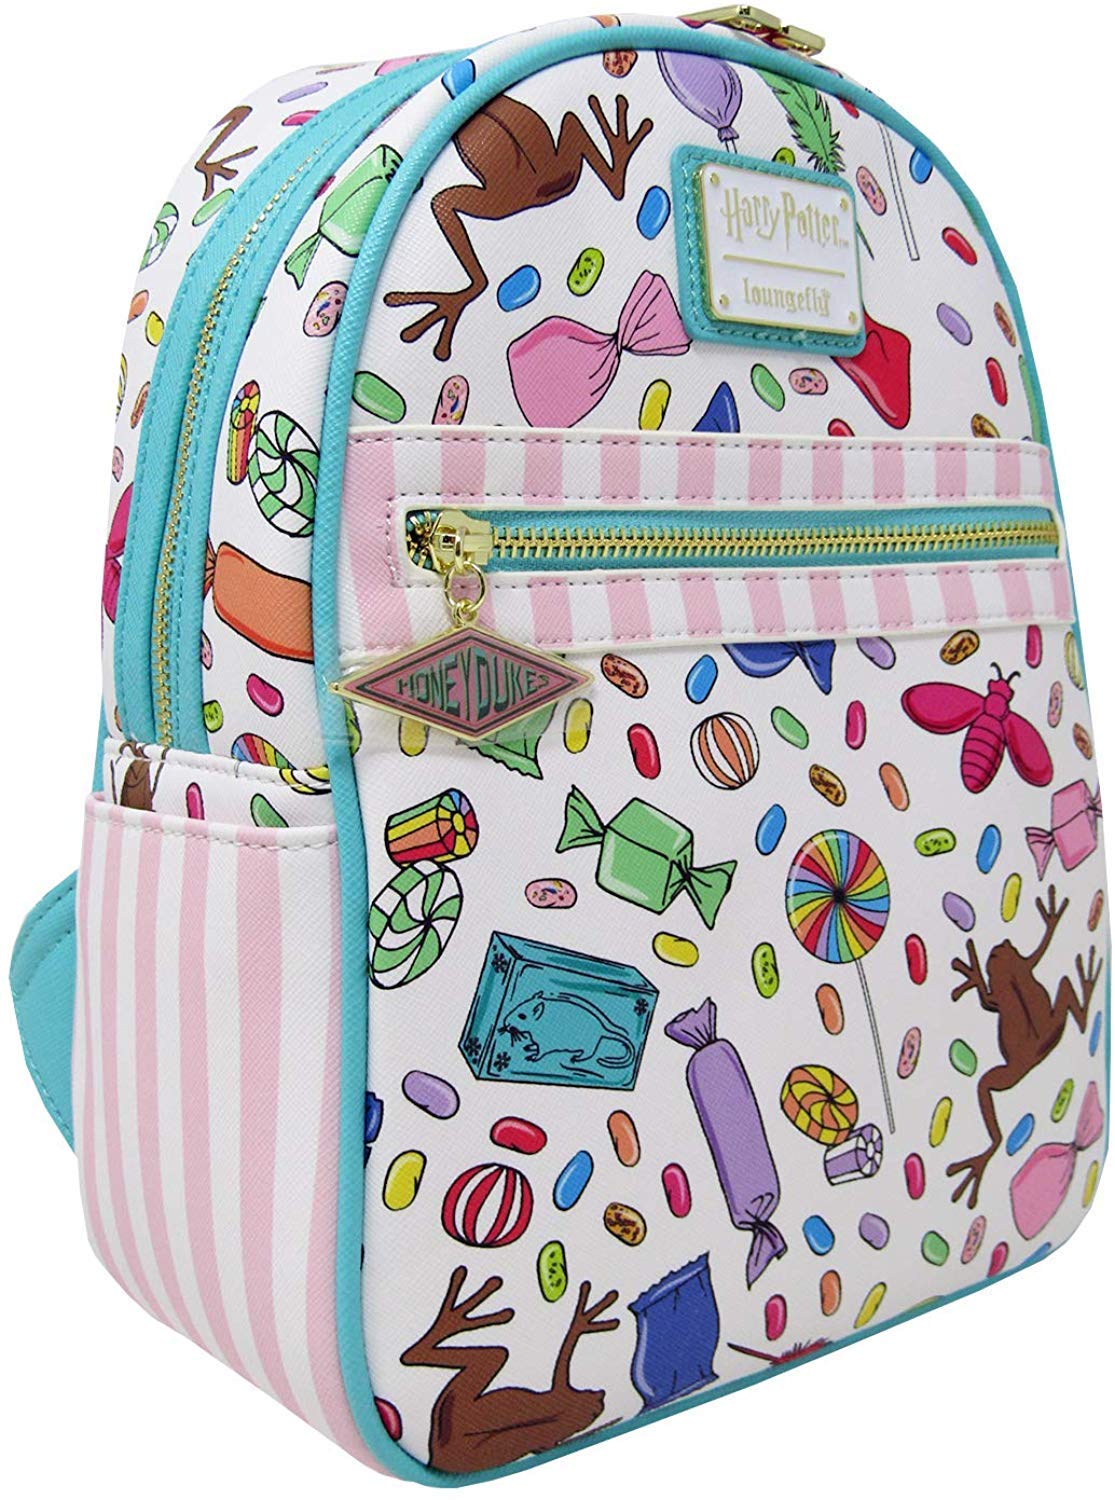 Loungefly x Harry Potter Honeydukes Candy Printed Mini Backpack (One Size, Multicolored)